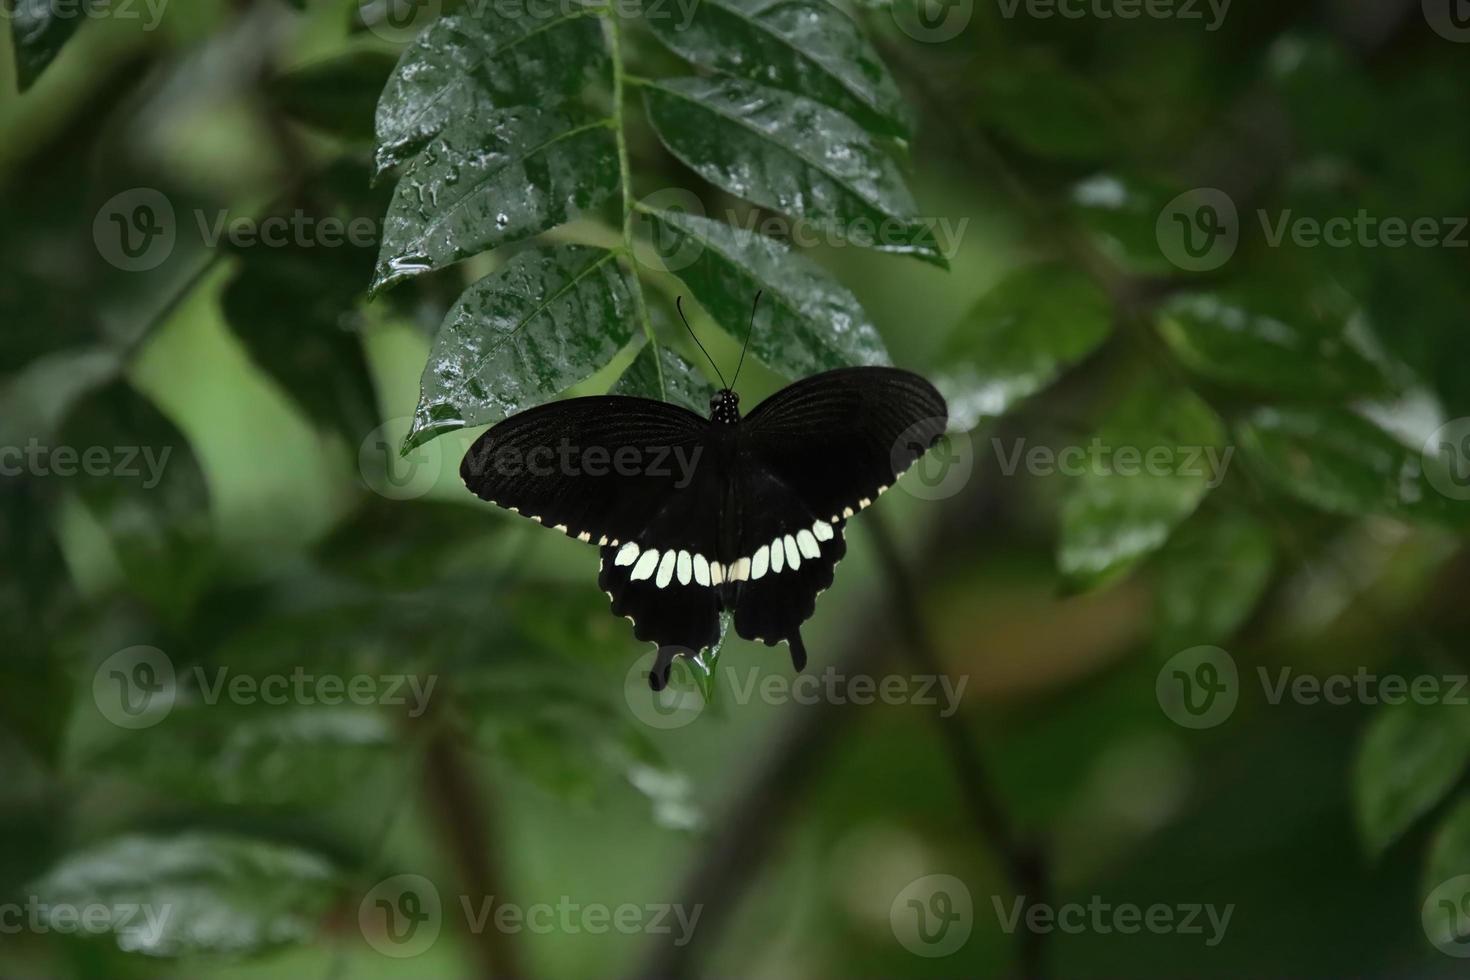 Common Mormon Swallowtail Butterfly resting on a leaf under the shade photo